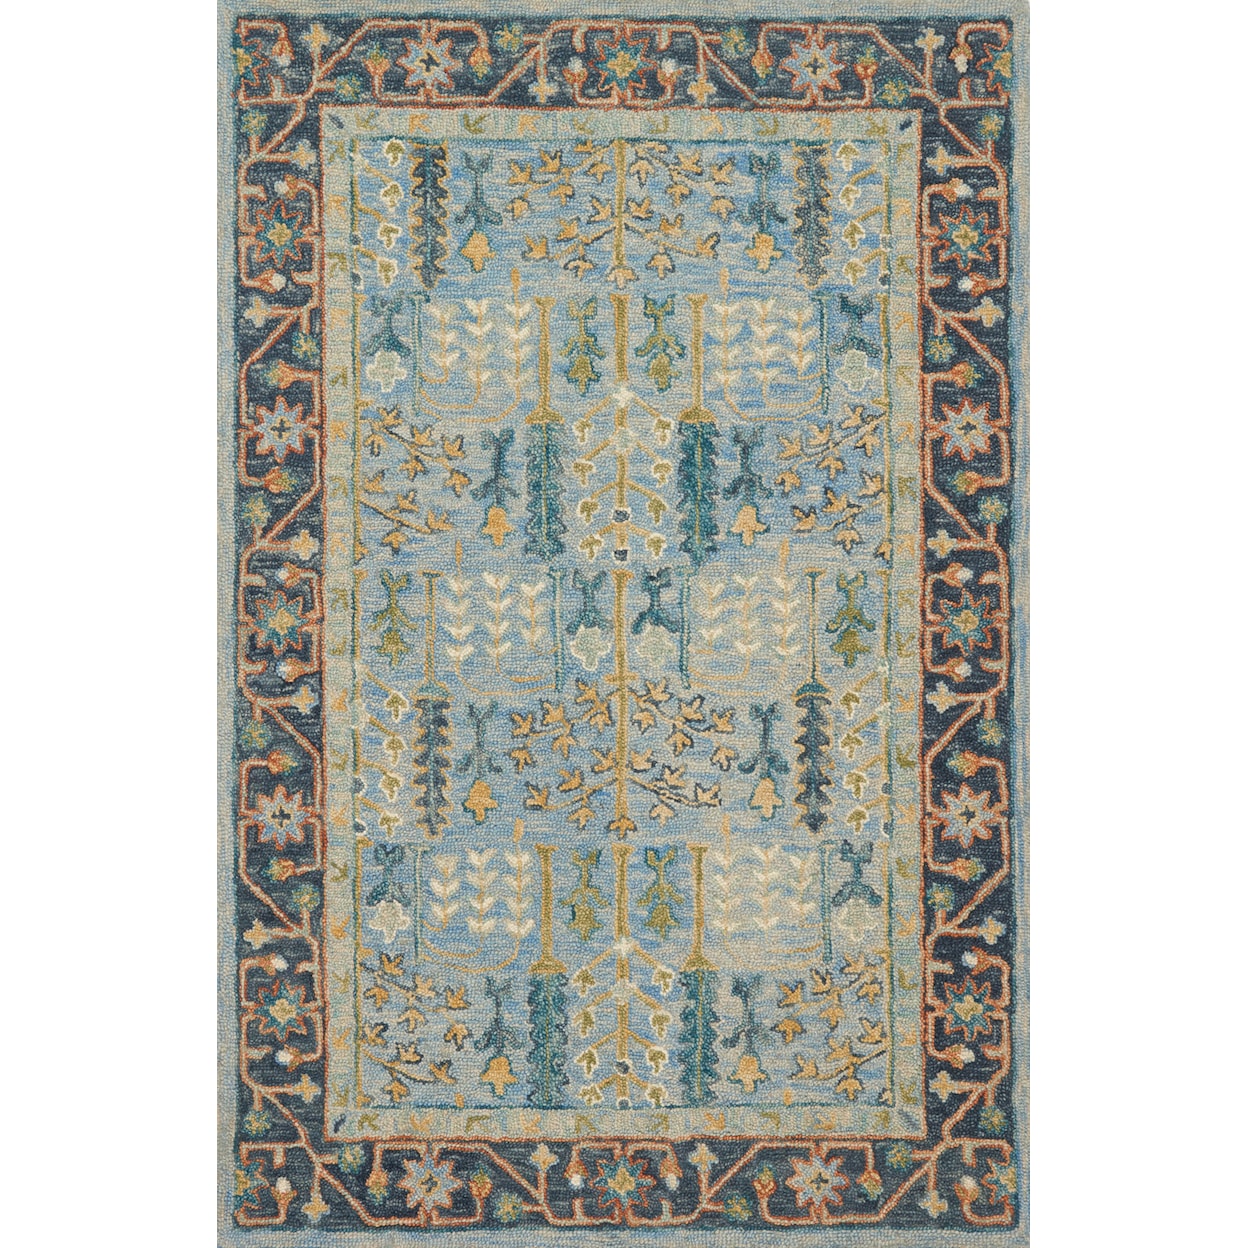 Reeds Rugs Victoria 3'-6" x 5'-6" Area Rug